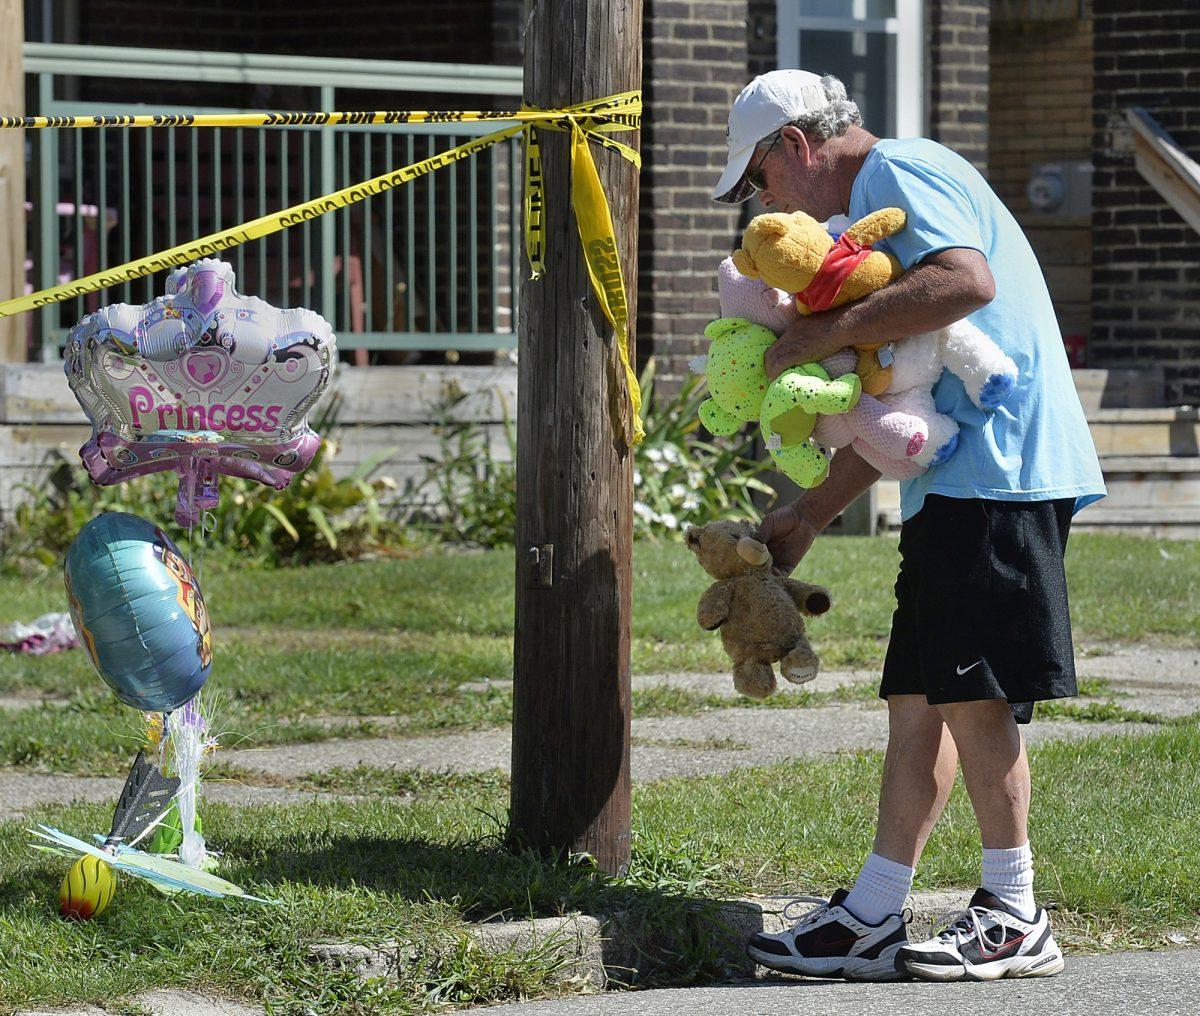 Paul Laughlin, 57, places stuffed animals outside a home at 1248 West 11th St. in Erie, Pa., where multiple people died in an early-morning fire, on Aug. 11, 2019. (Greg Wohlford/Erie Times-News via AP)